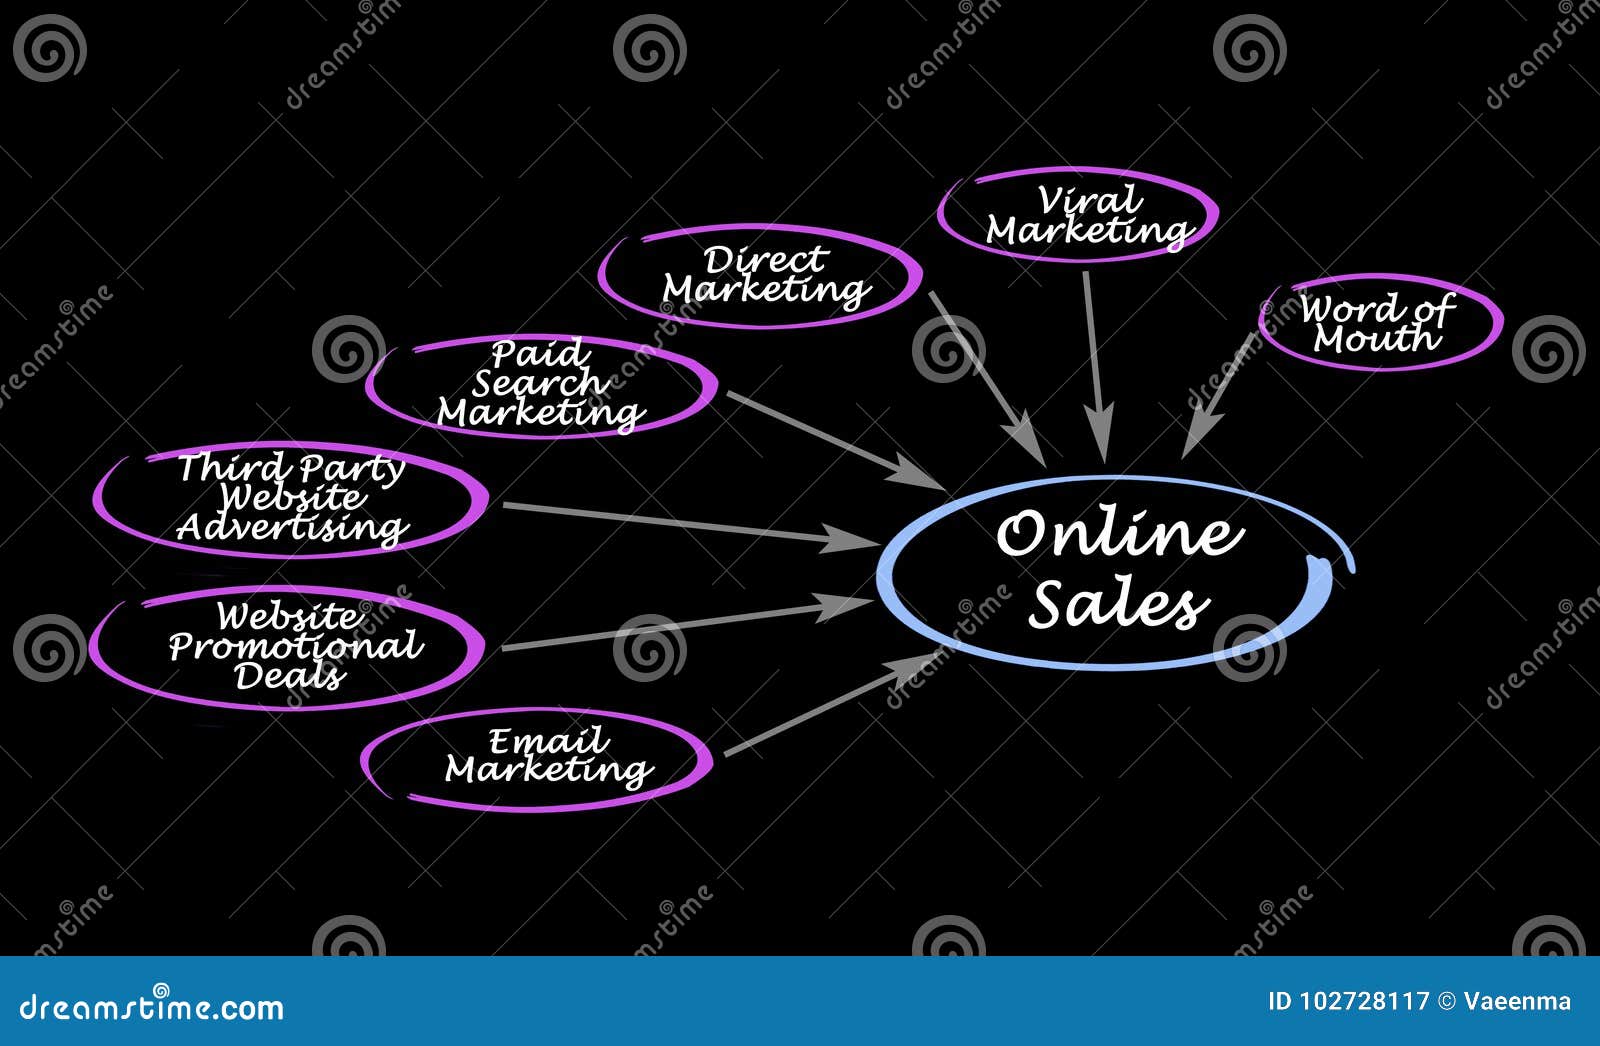 avenues for online sales